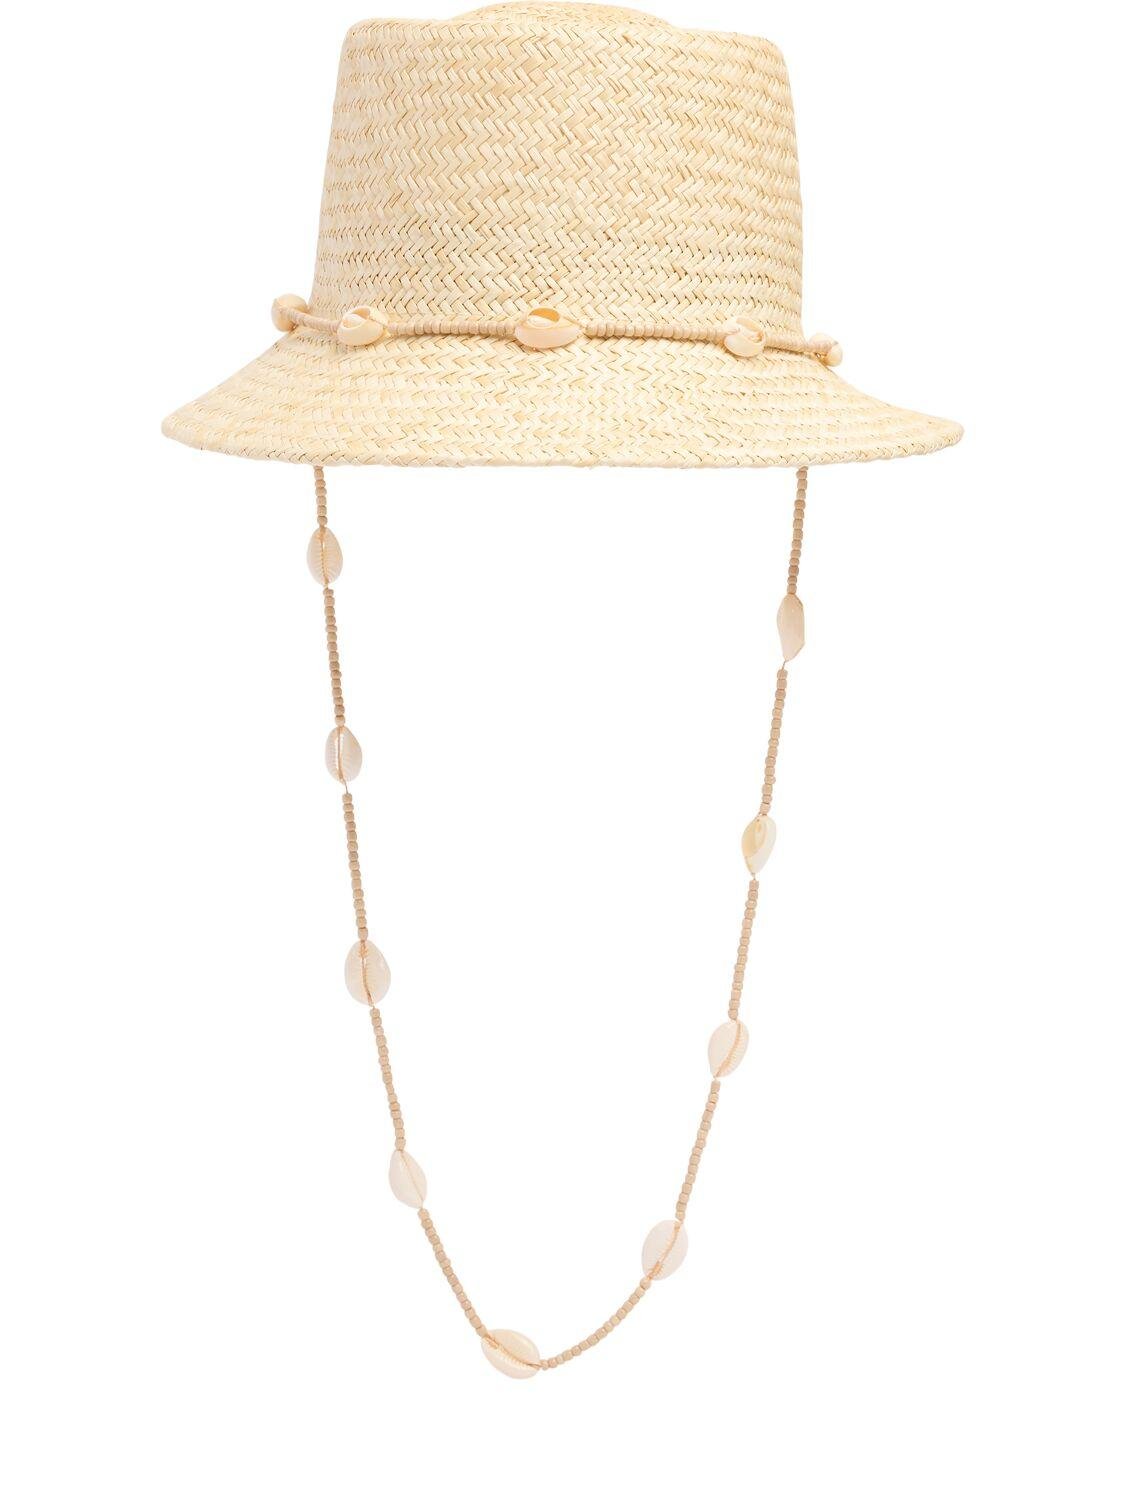 Inca Seashell Bucket Hat by LACK OF COLOR